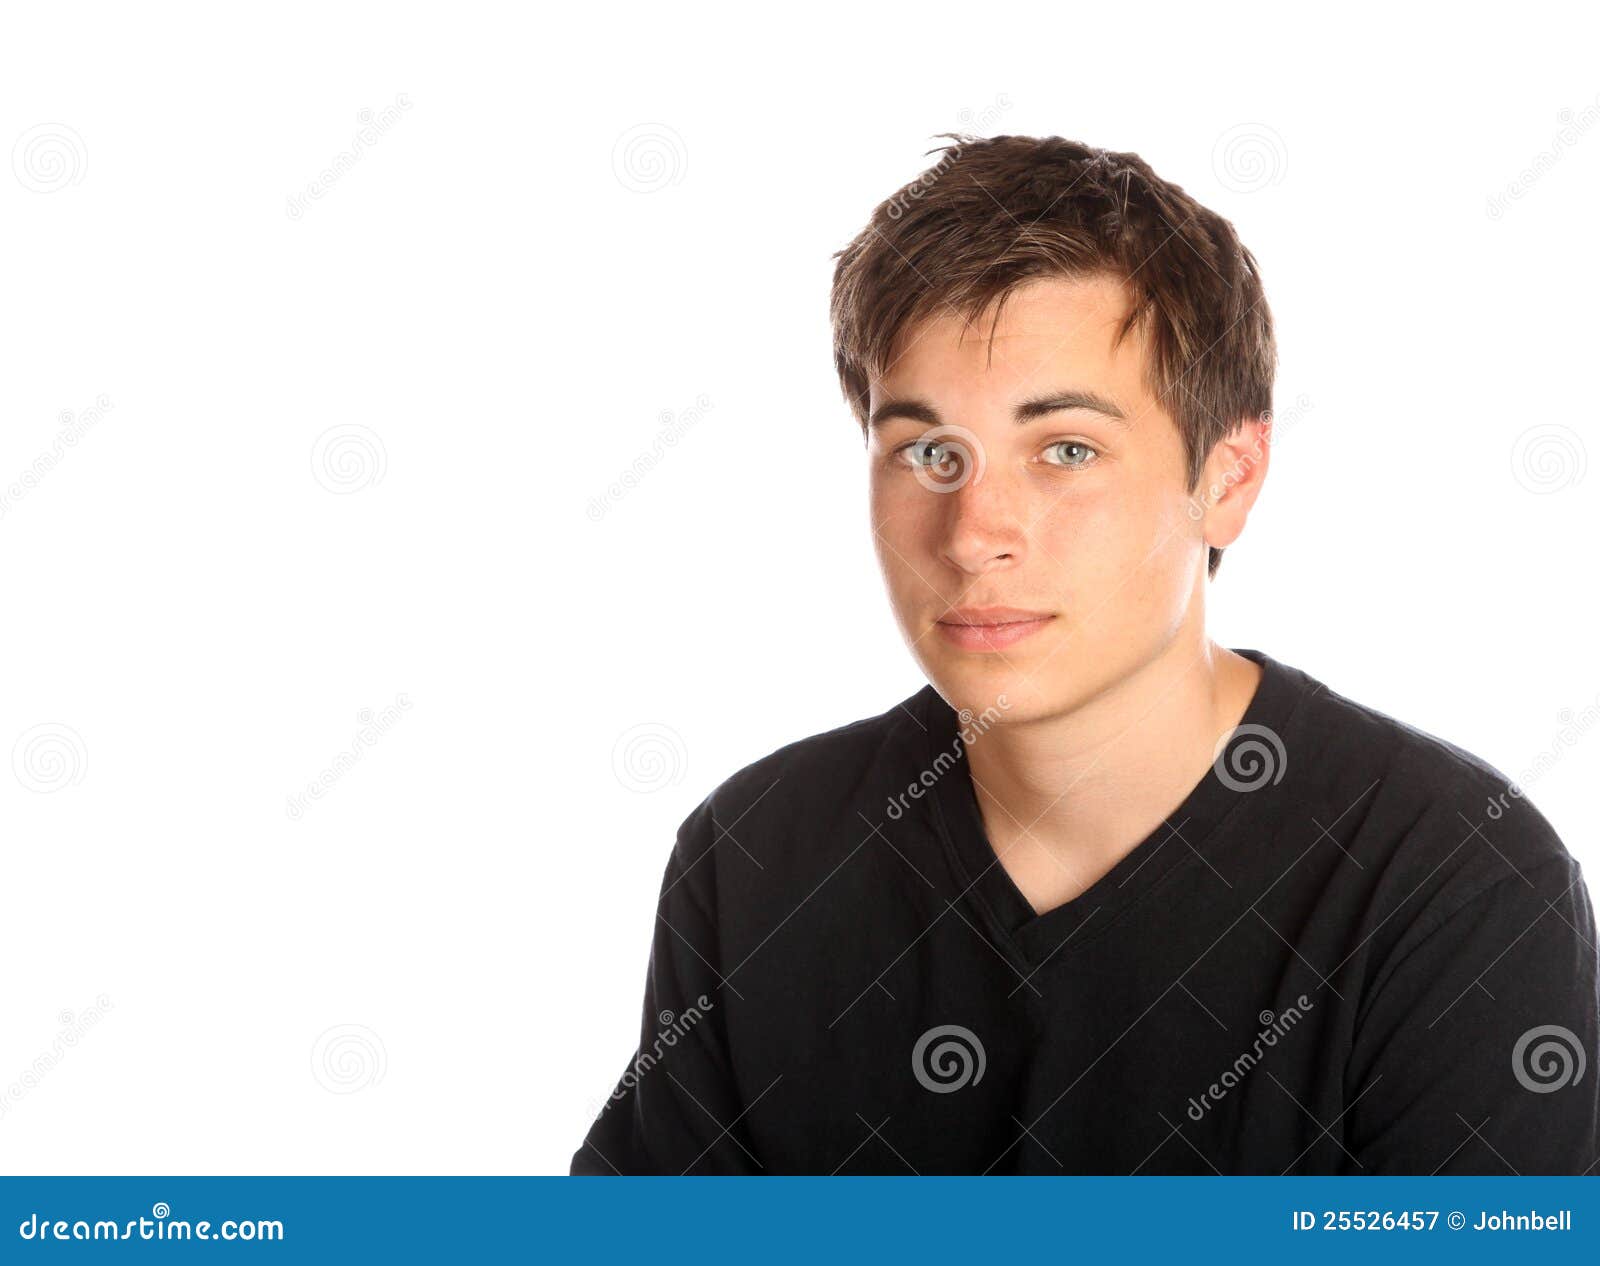 Young Man Against White Background. Stock Image - Image of style, model ...